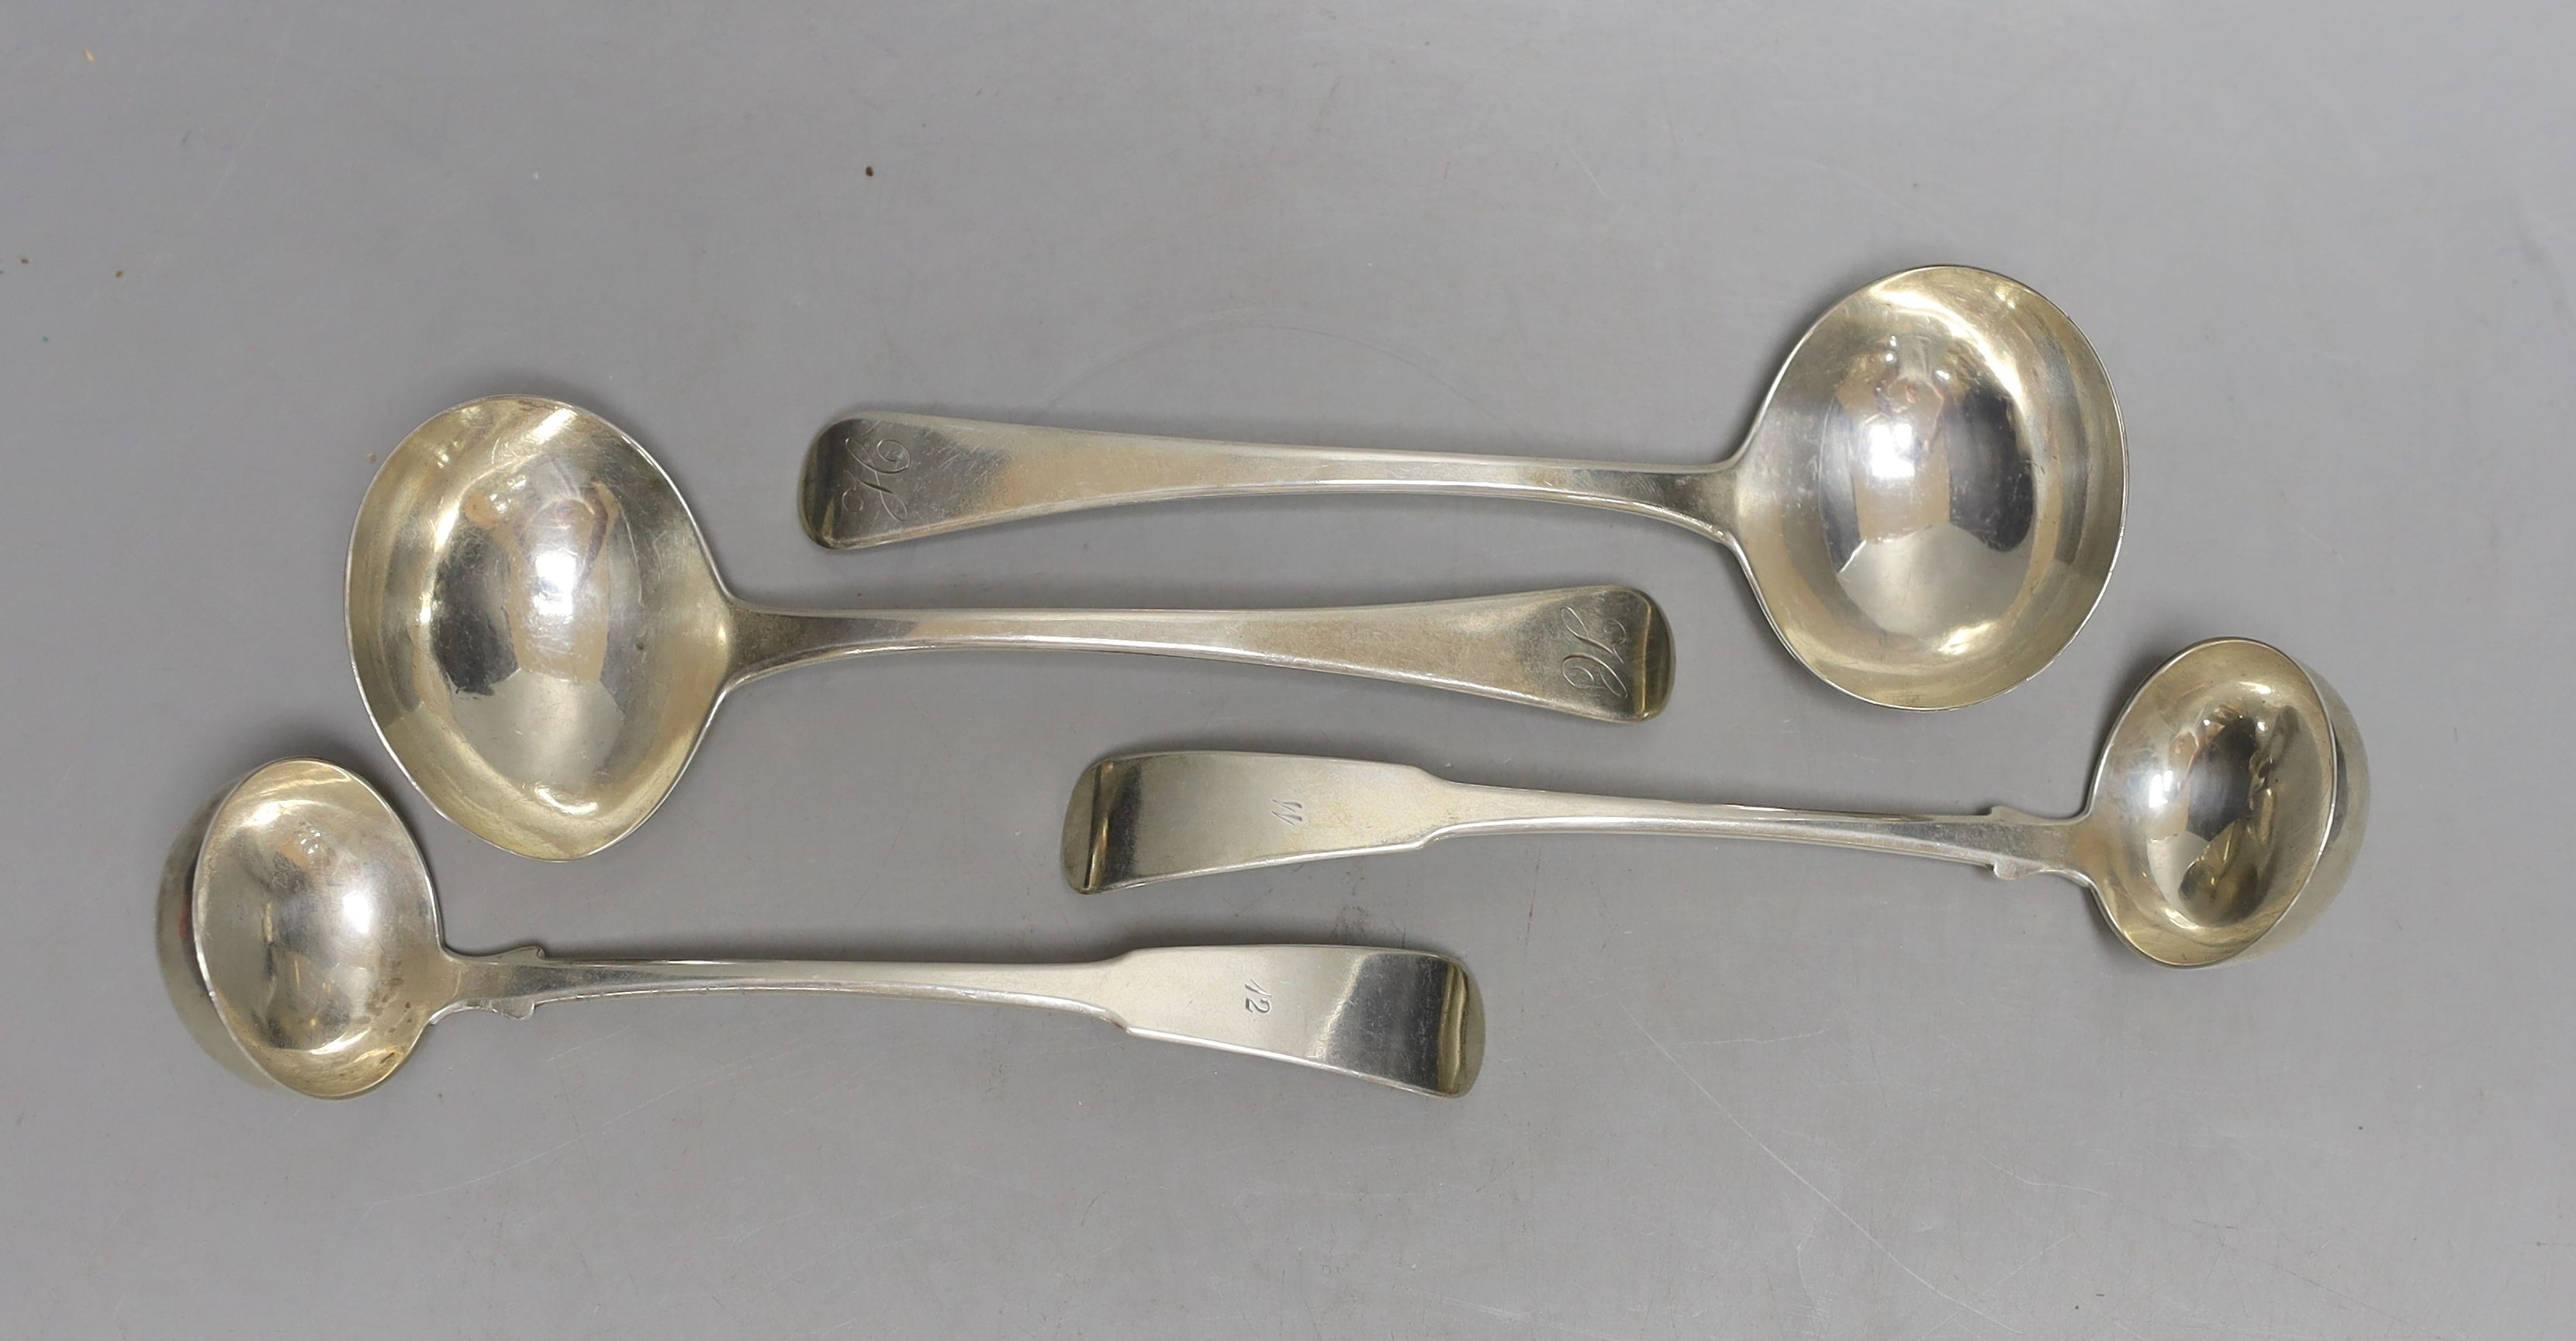 A pair of George IV Scottish silver fiddle pattern sauce ladles, by William Hannay, Glasgow, 1823, 16cm and a pair of George III silver Old English pattern sauce ladles, Eley, Fearn & Chawner, London, 1813, 163 grams